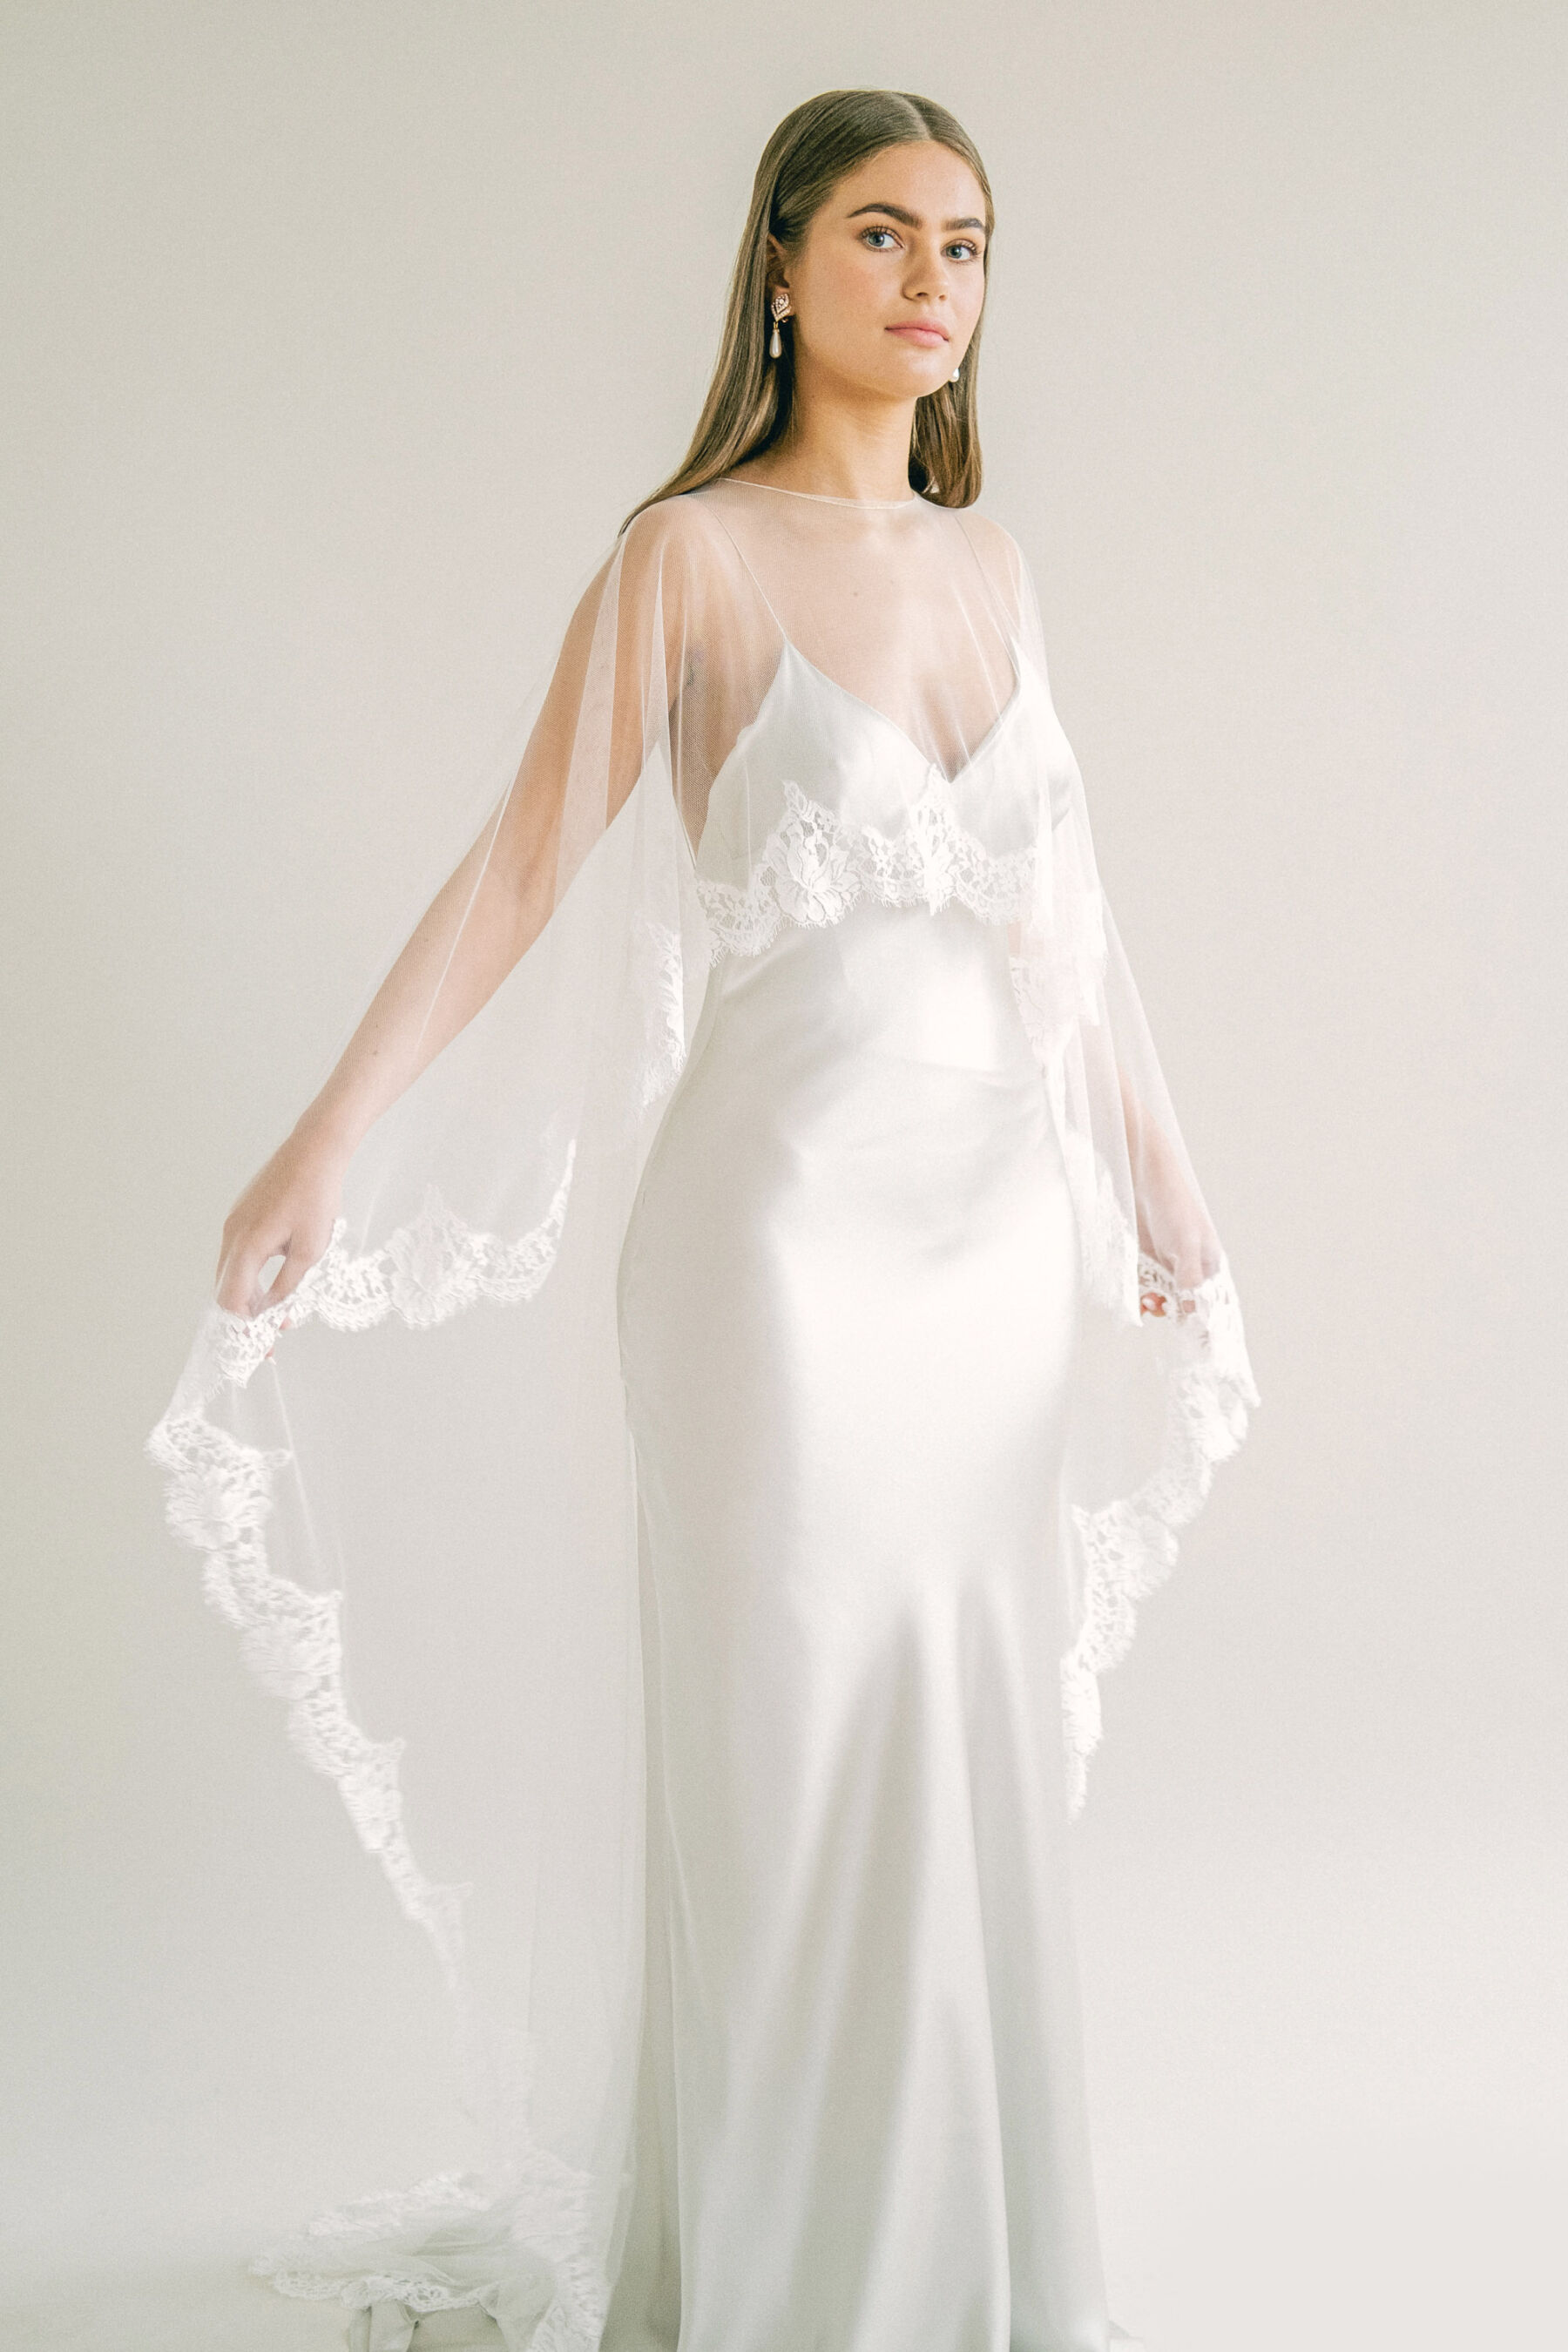 Kate Beaumont wedding bias cut slip wedding dress with cape veil that is shorter at the front and longer at the back.